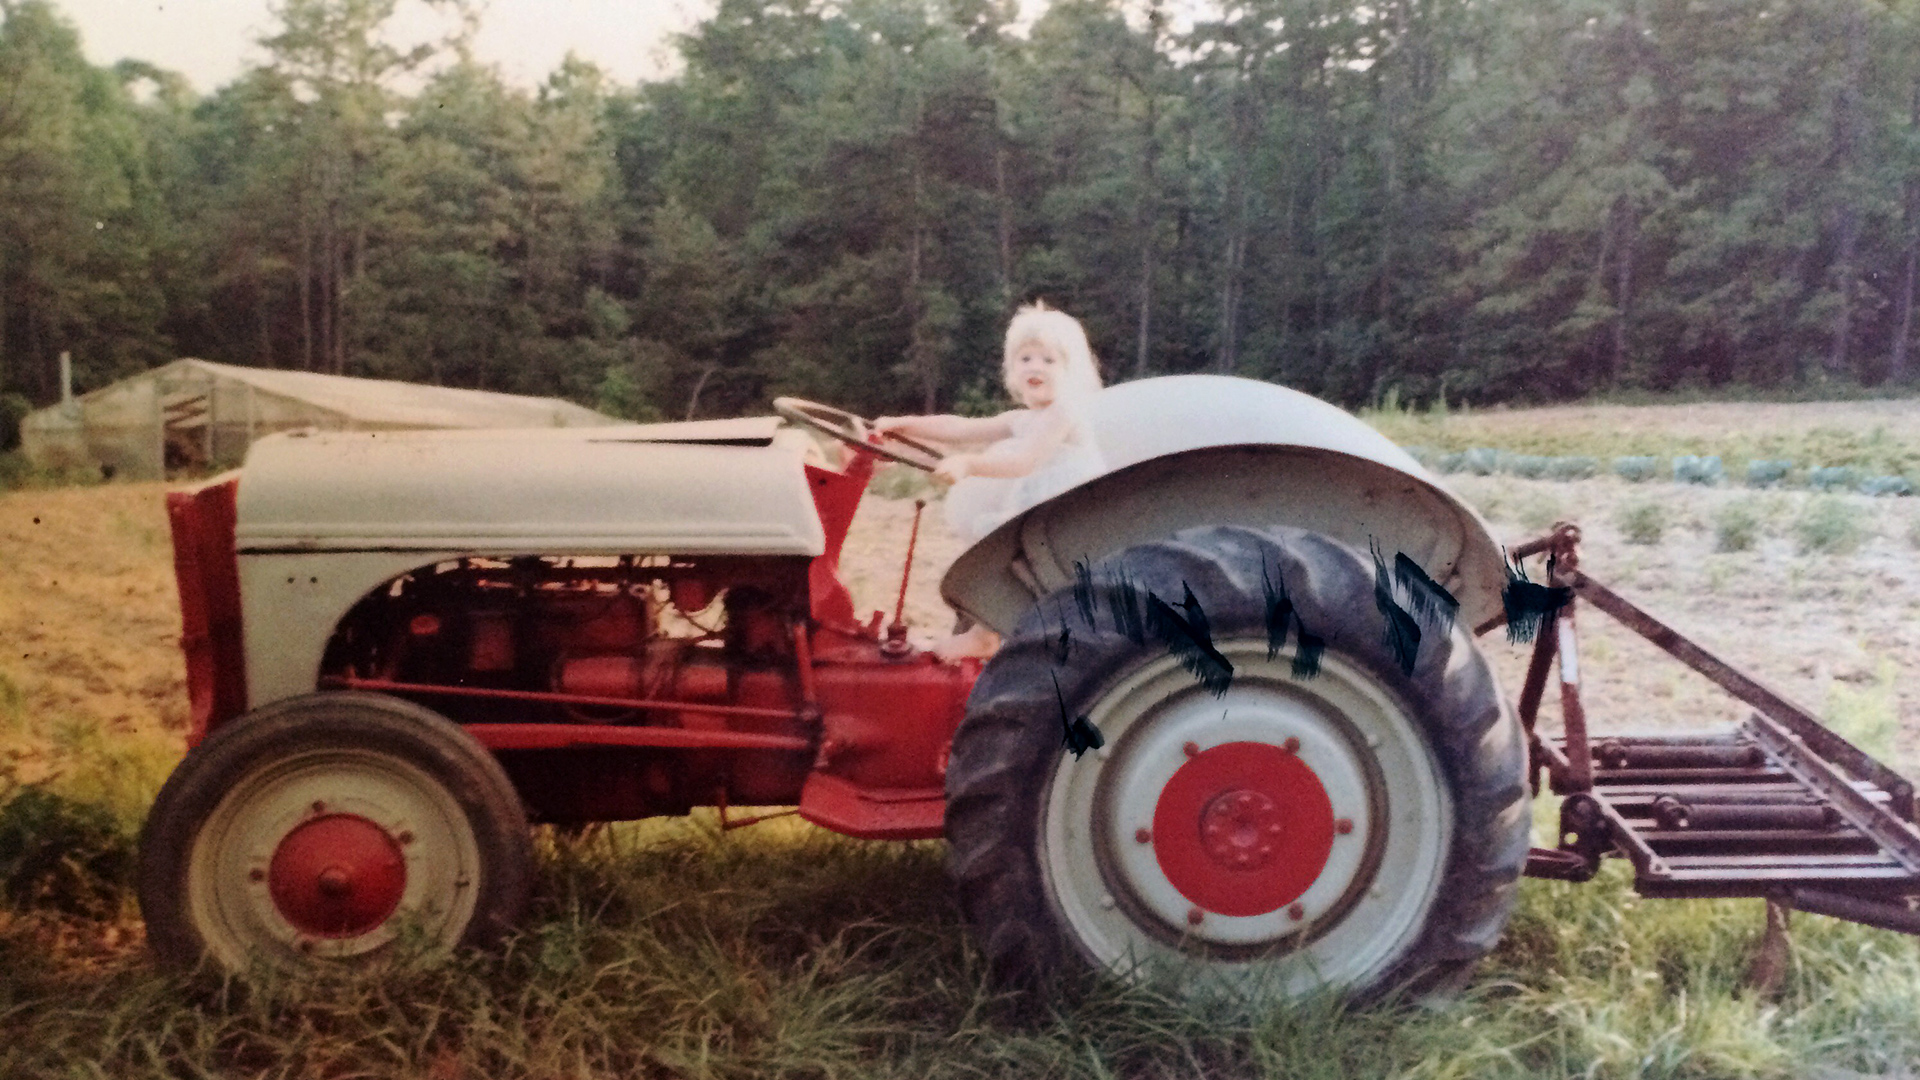 The author, when she was a child, on her grandfather's tractor